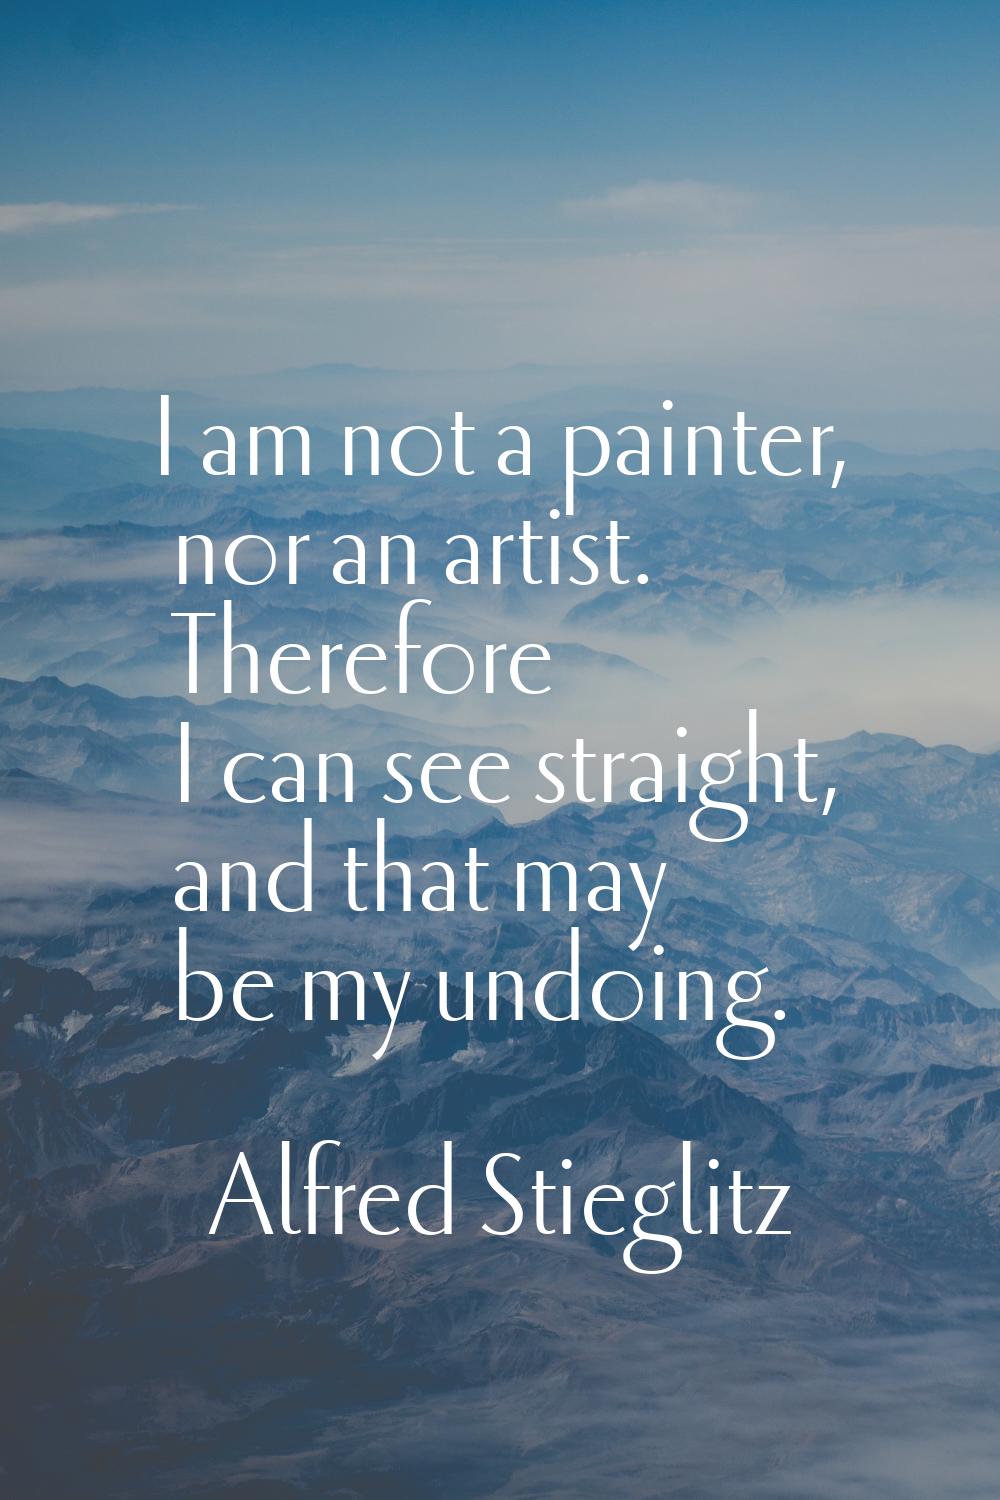 I am not a painter, nor an artist. Therefore I can see straight, and that may be my undoing.